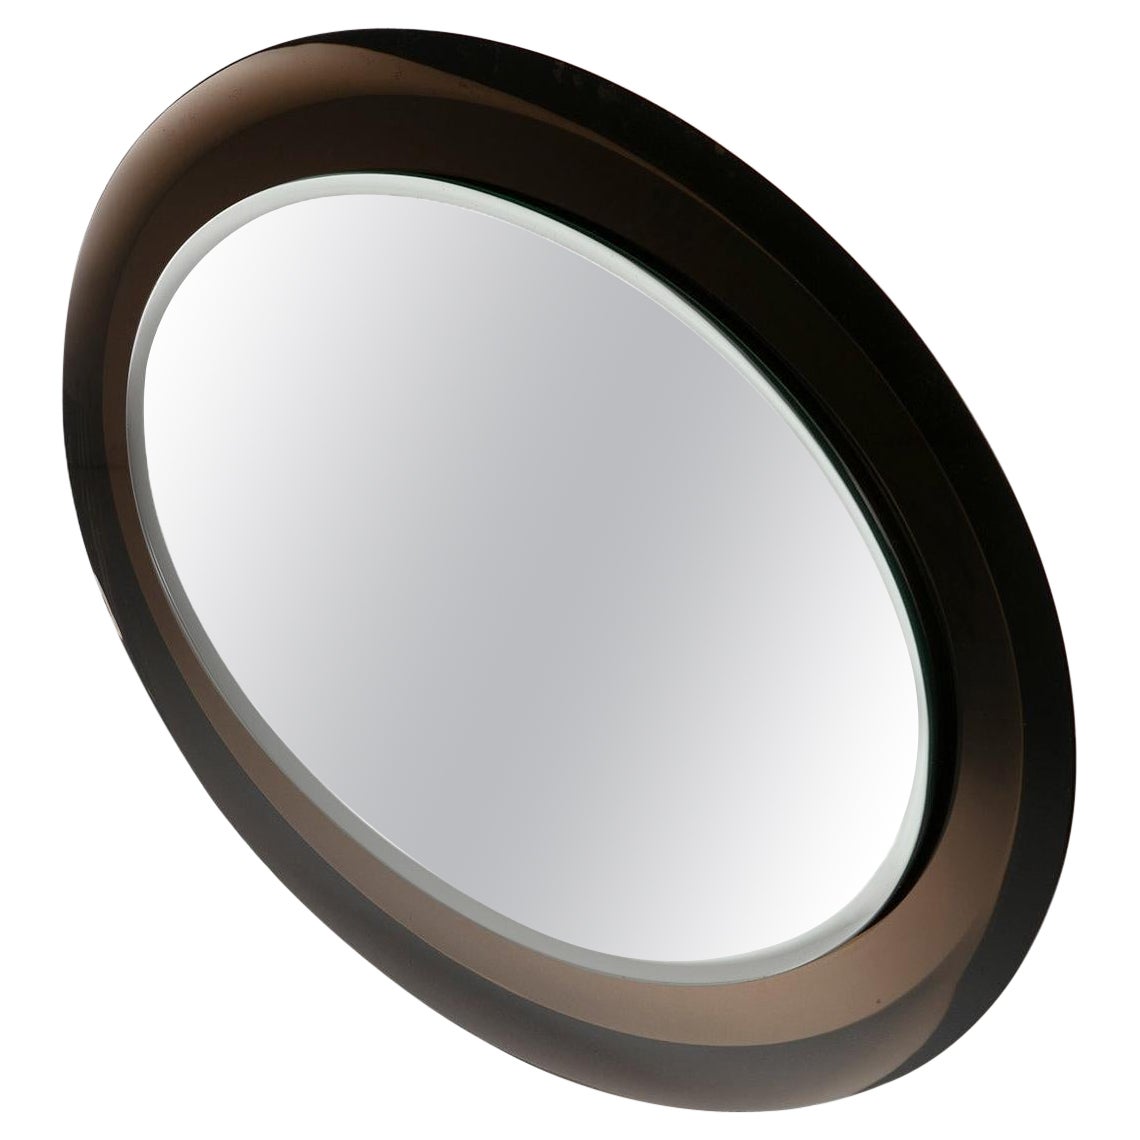 Large Double Bevelled Oval Wall Mirror, Metalvetro Galvorame, Italy, 1970s For Sale